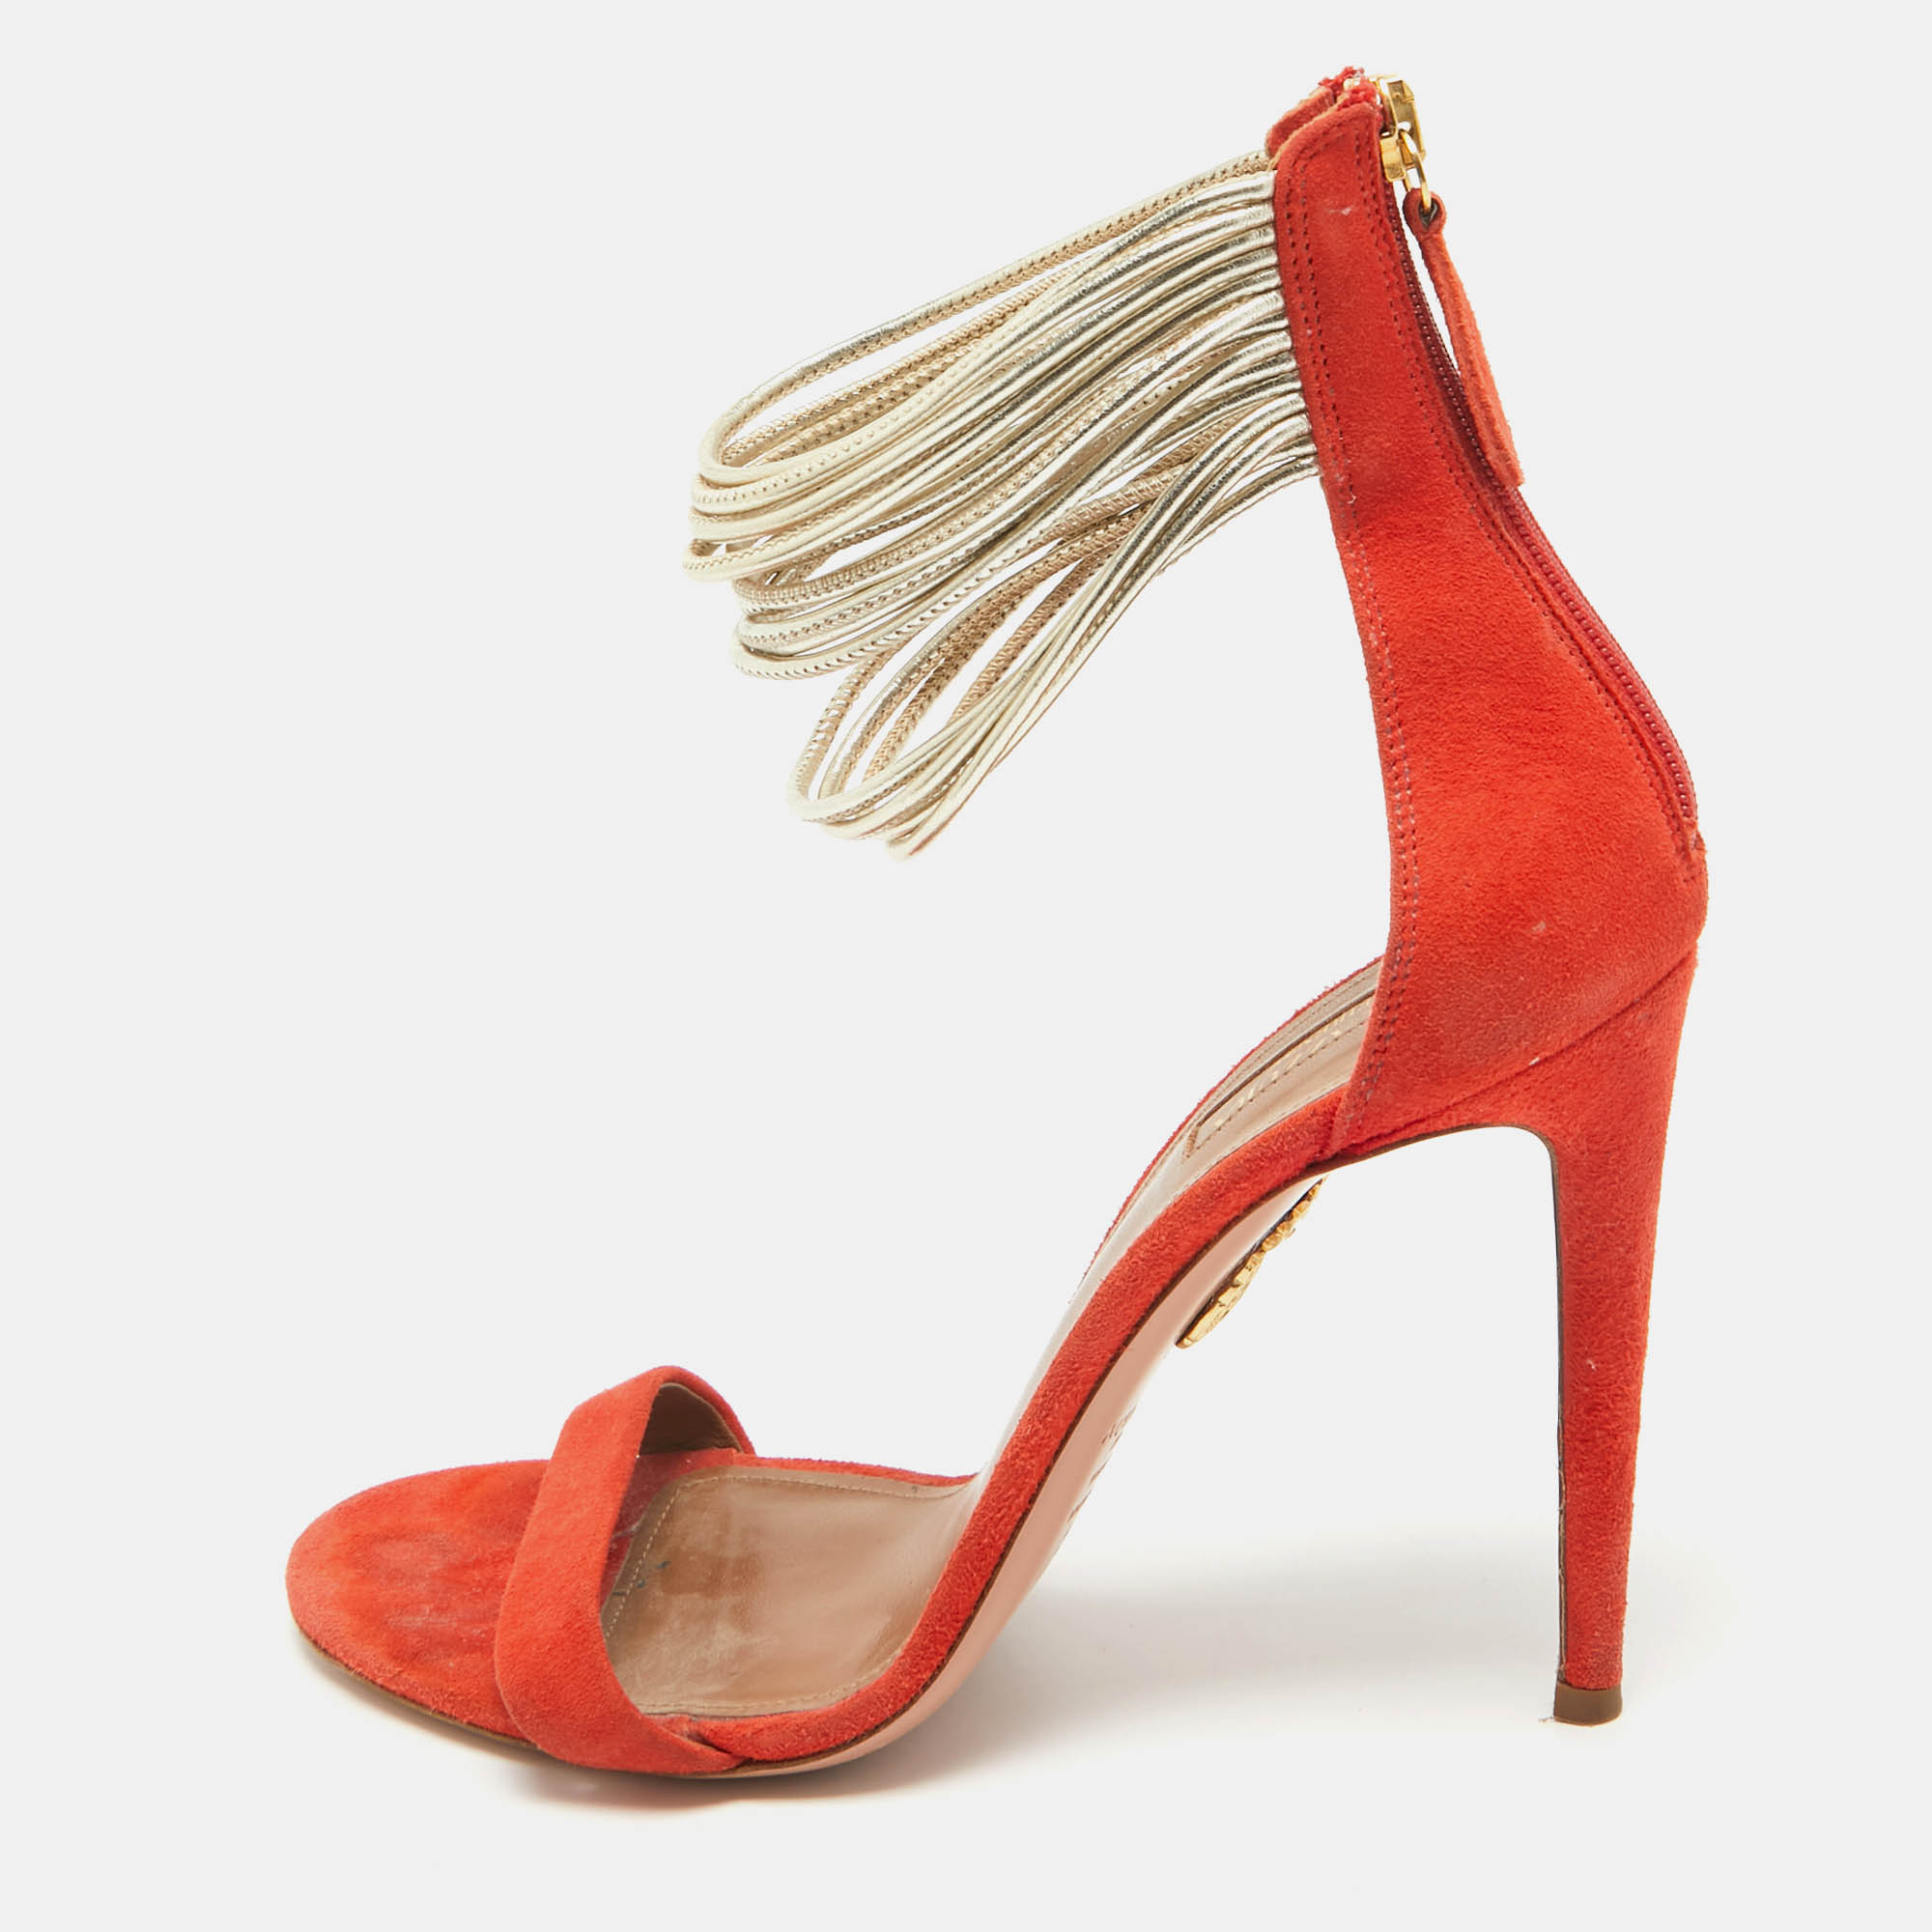 Aquazzura orange suede and leather ankle strap sandals size 38.5